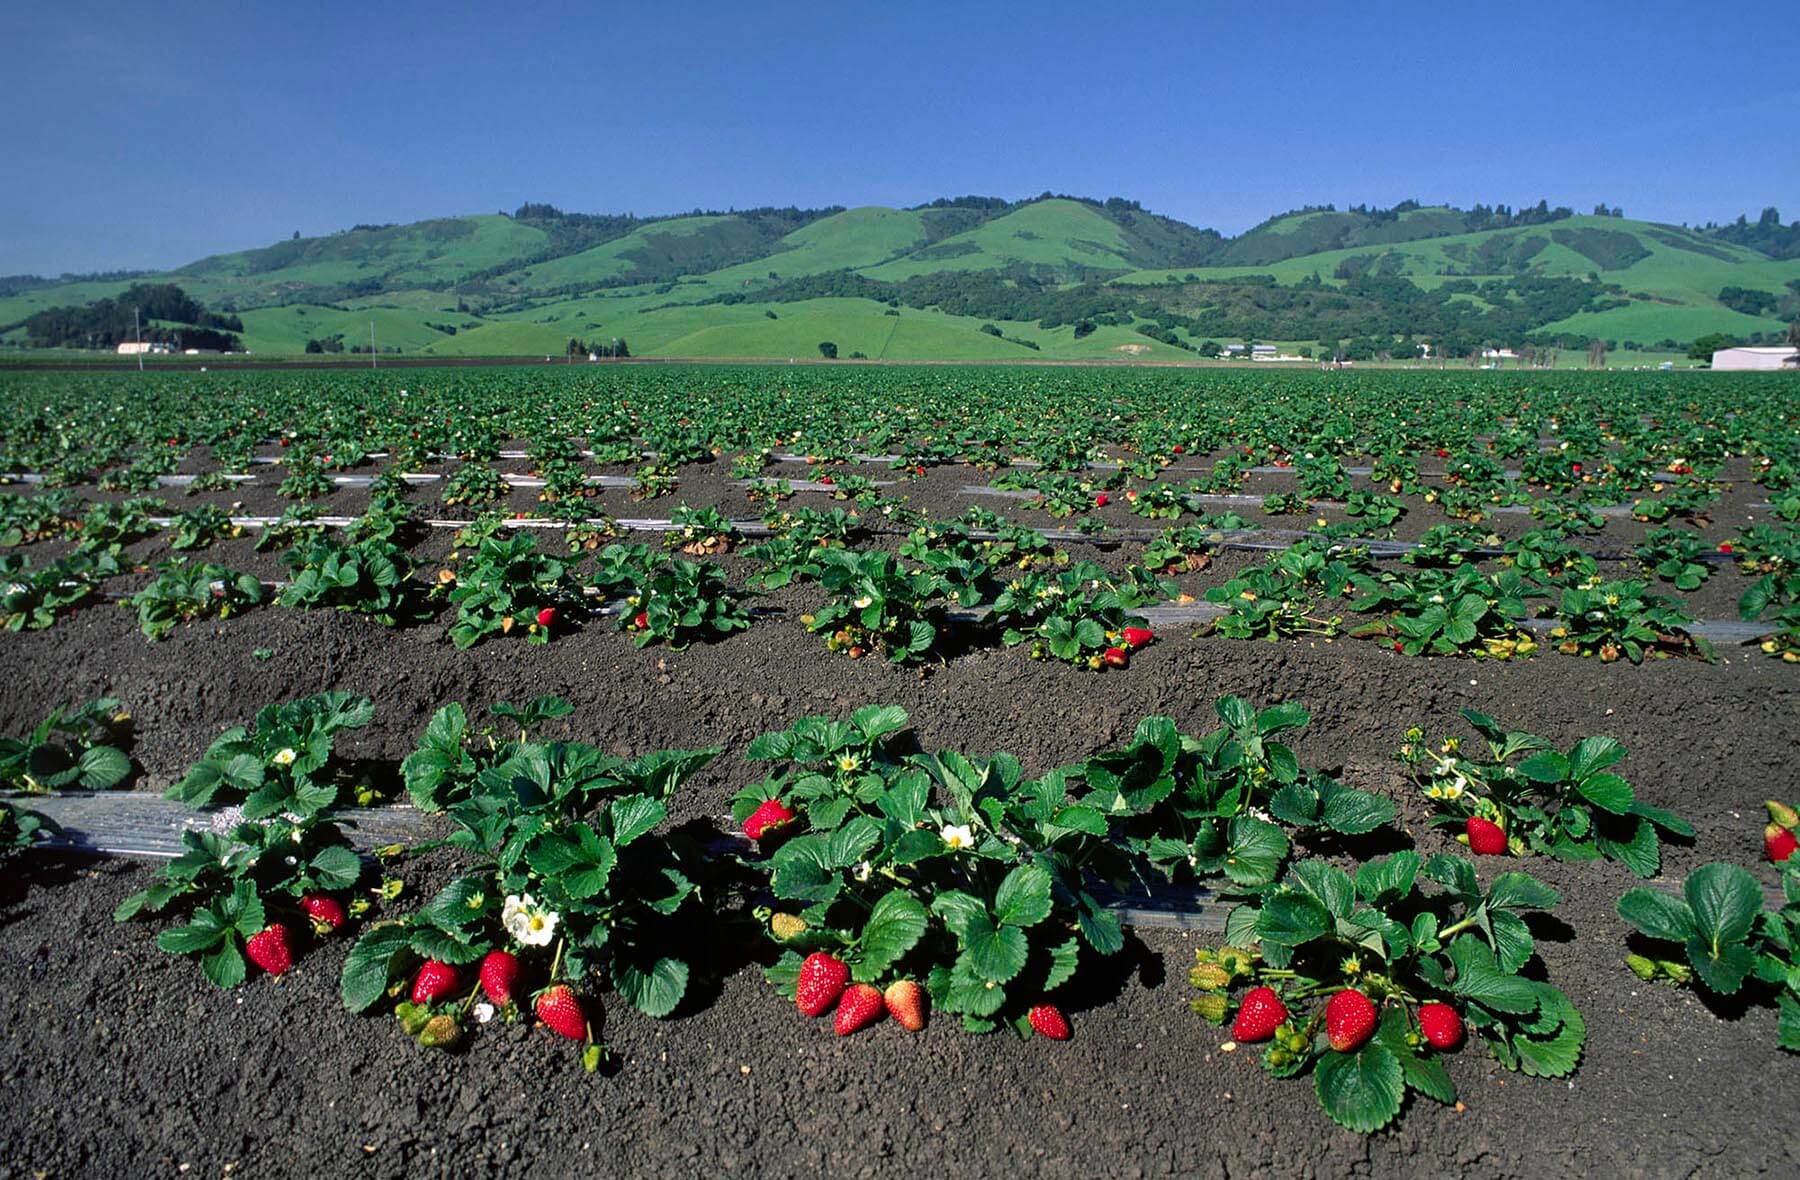 Strawberry field with ripe fruit in Watsonville, California. - Agricultural photography by Craig Lovell